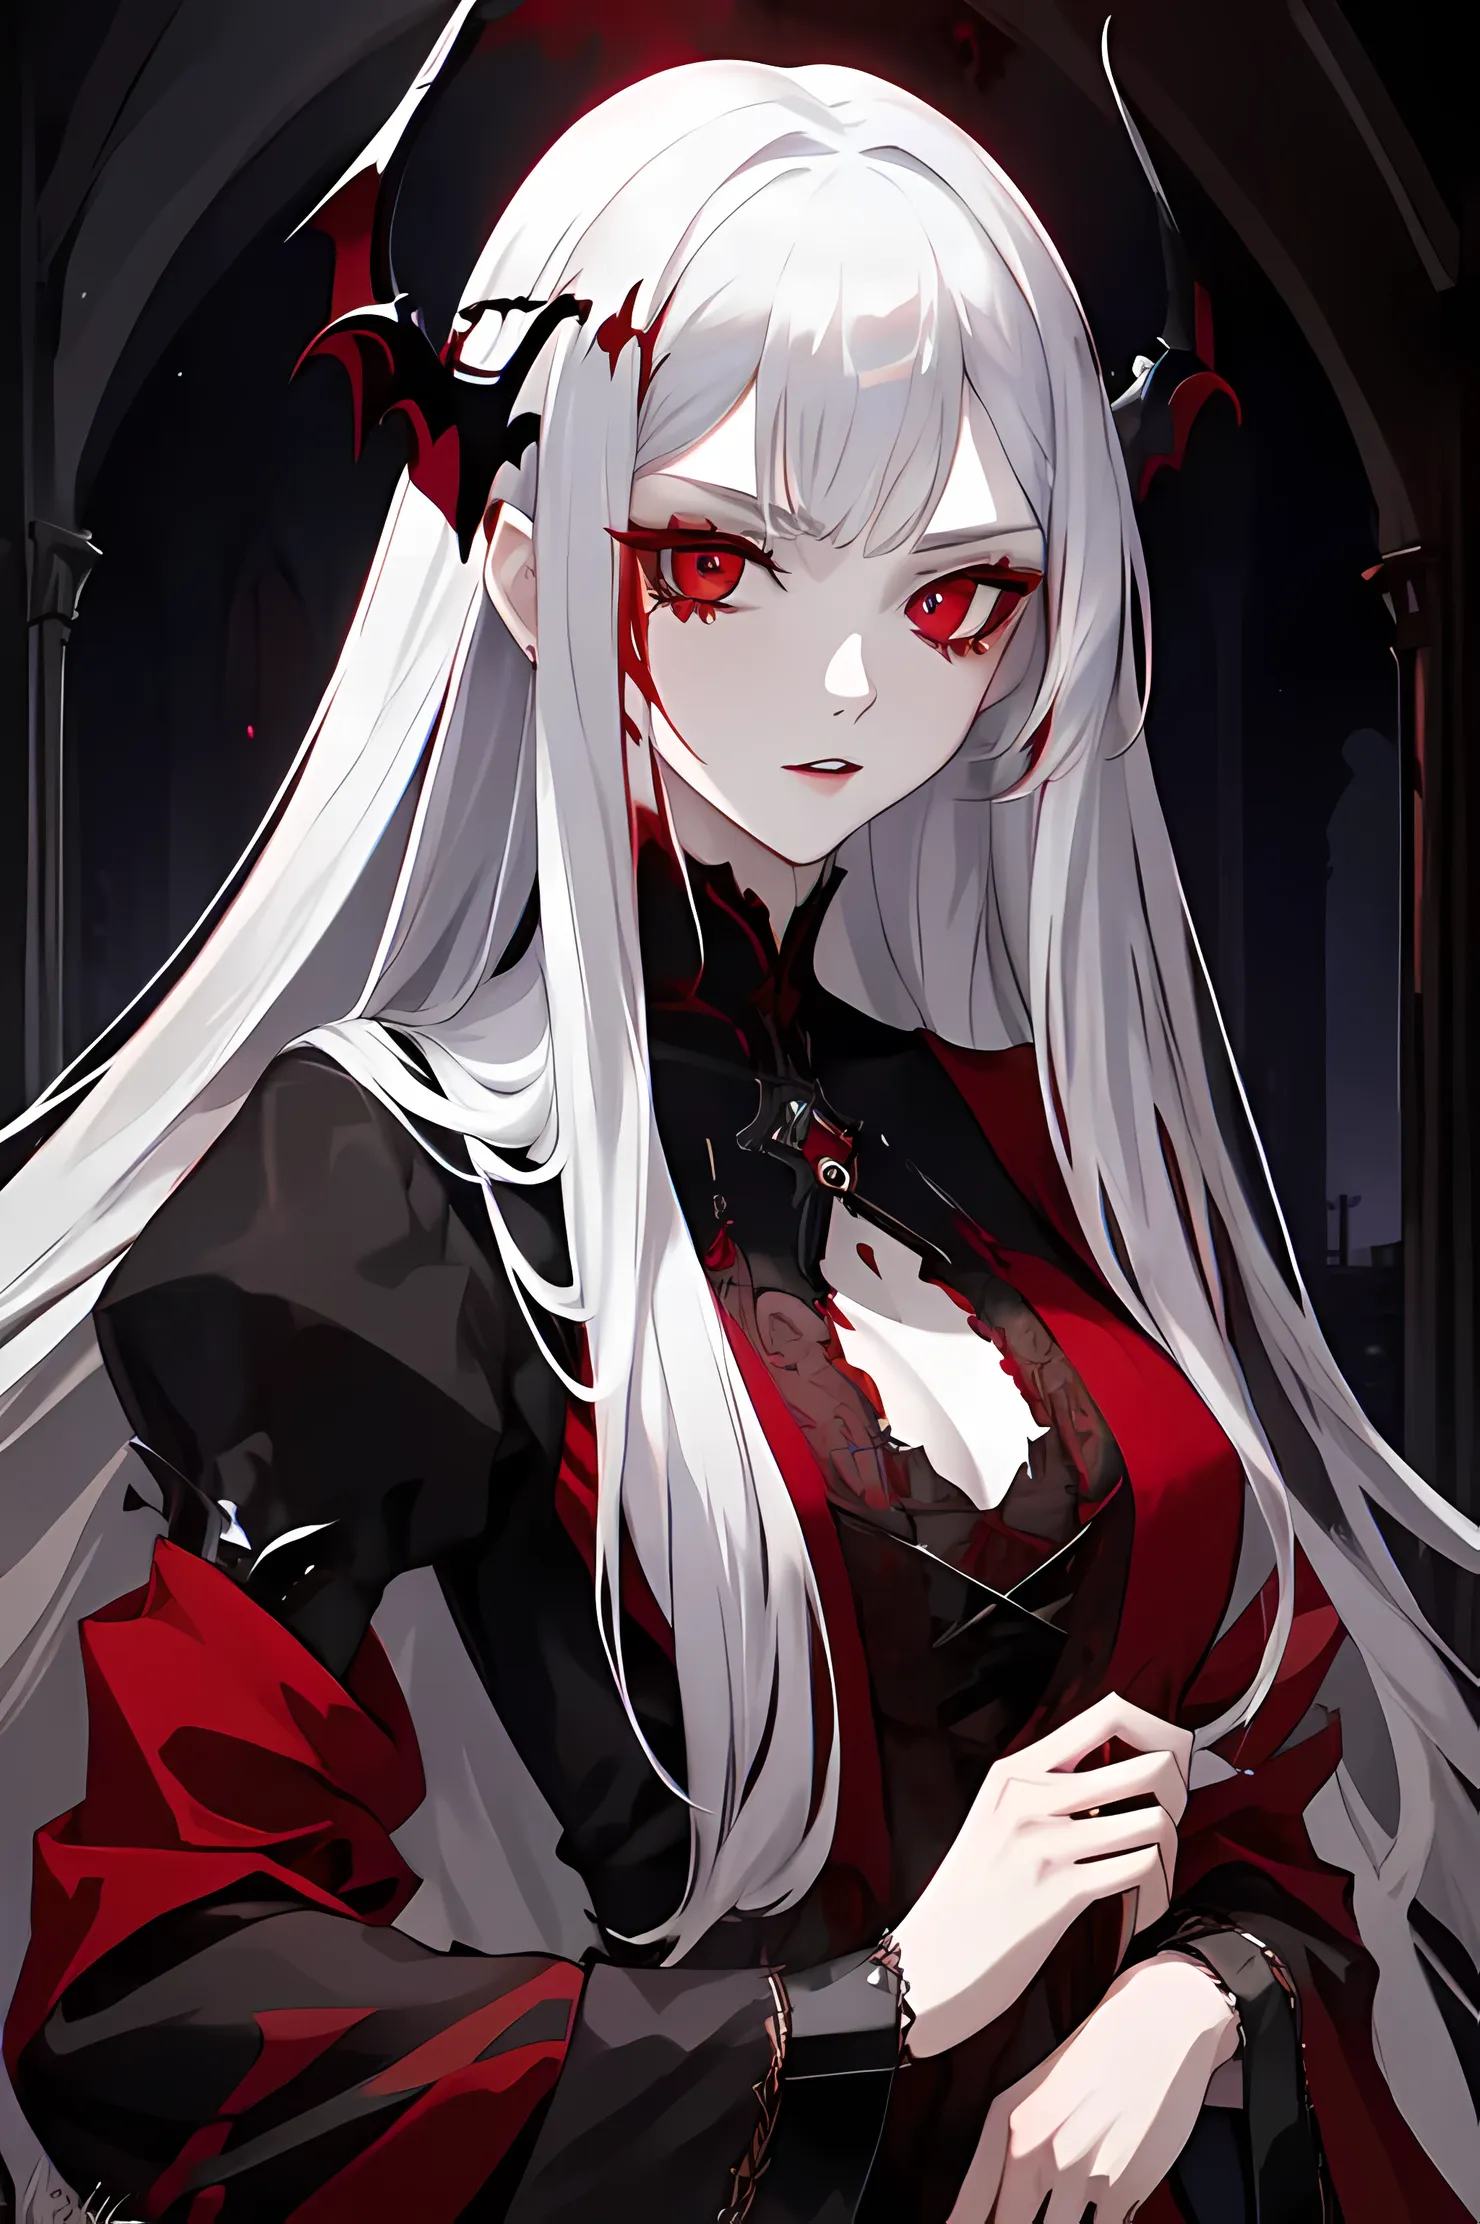 Give me your blood (Edvige) by @Recu | AI art in AnimeGenius